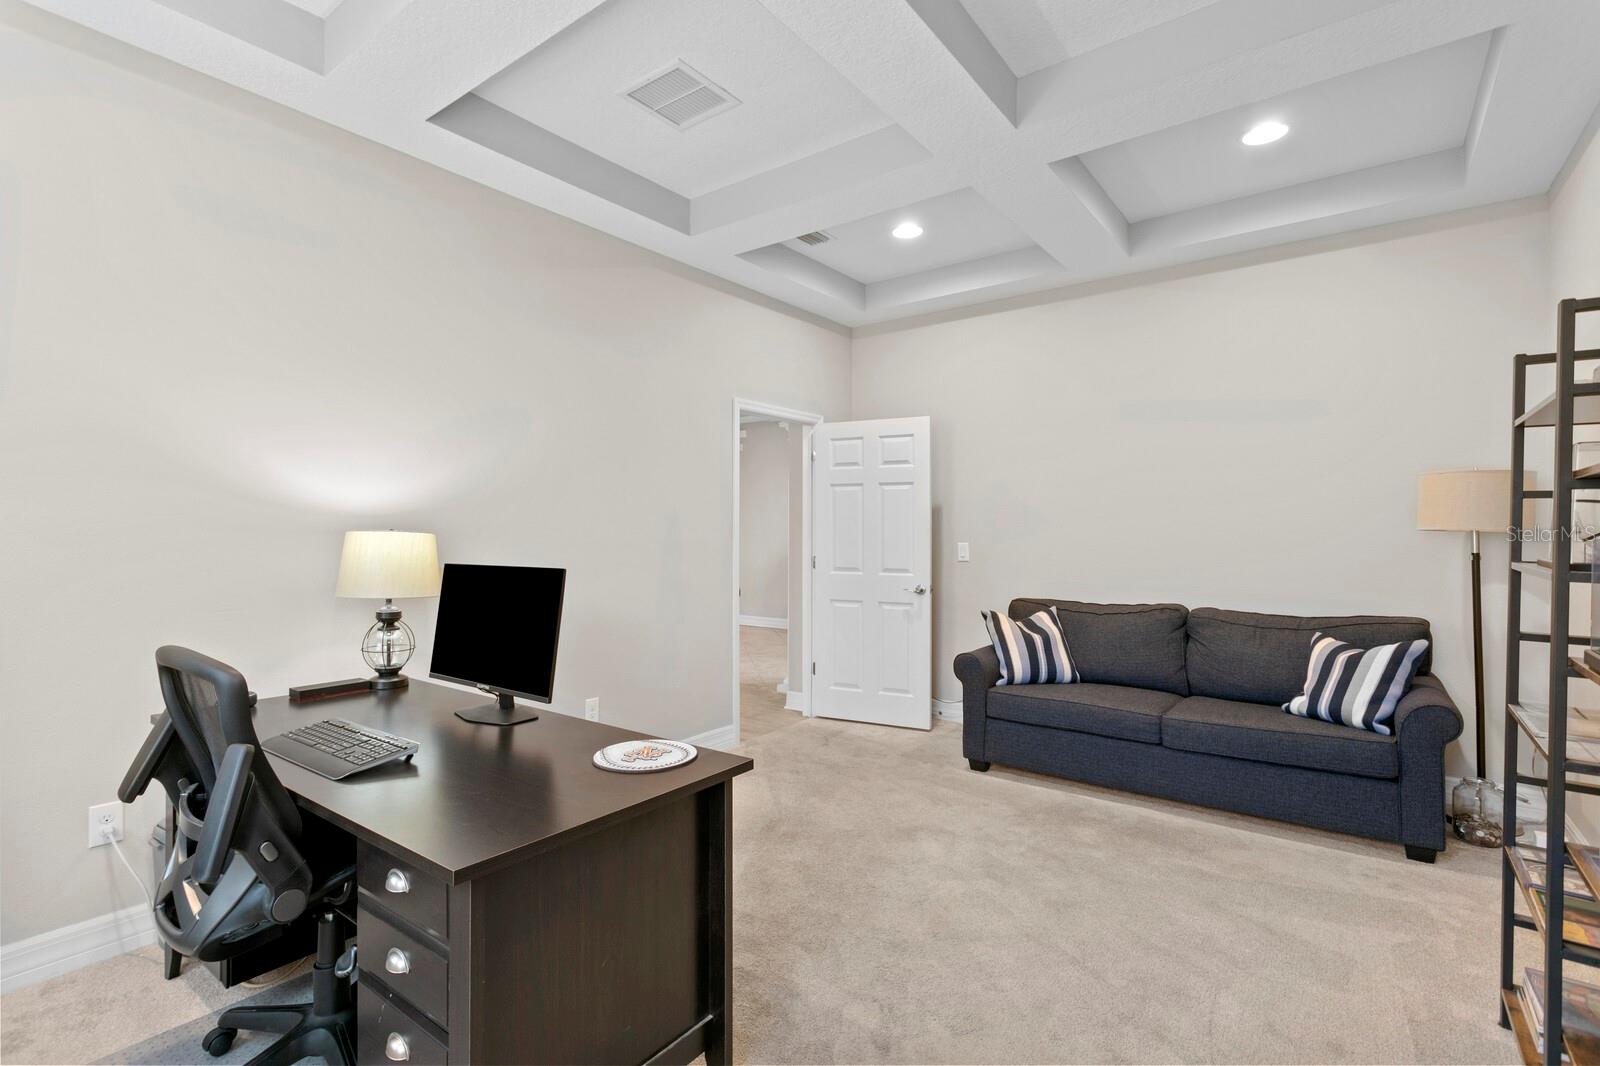 First floor office features decorative tray ceiling, and a huge working space.  This could be used as a 6th bedroom, game room, fitness area, and more.